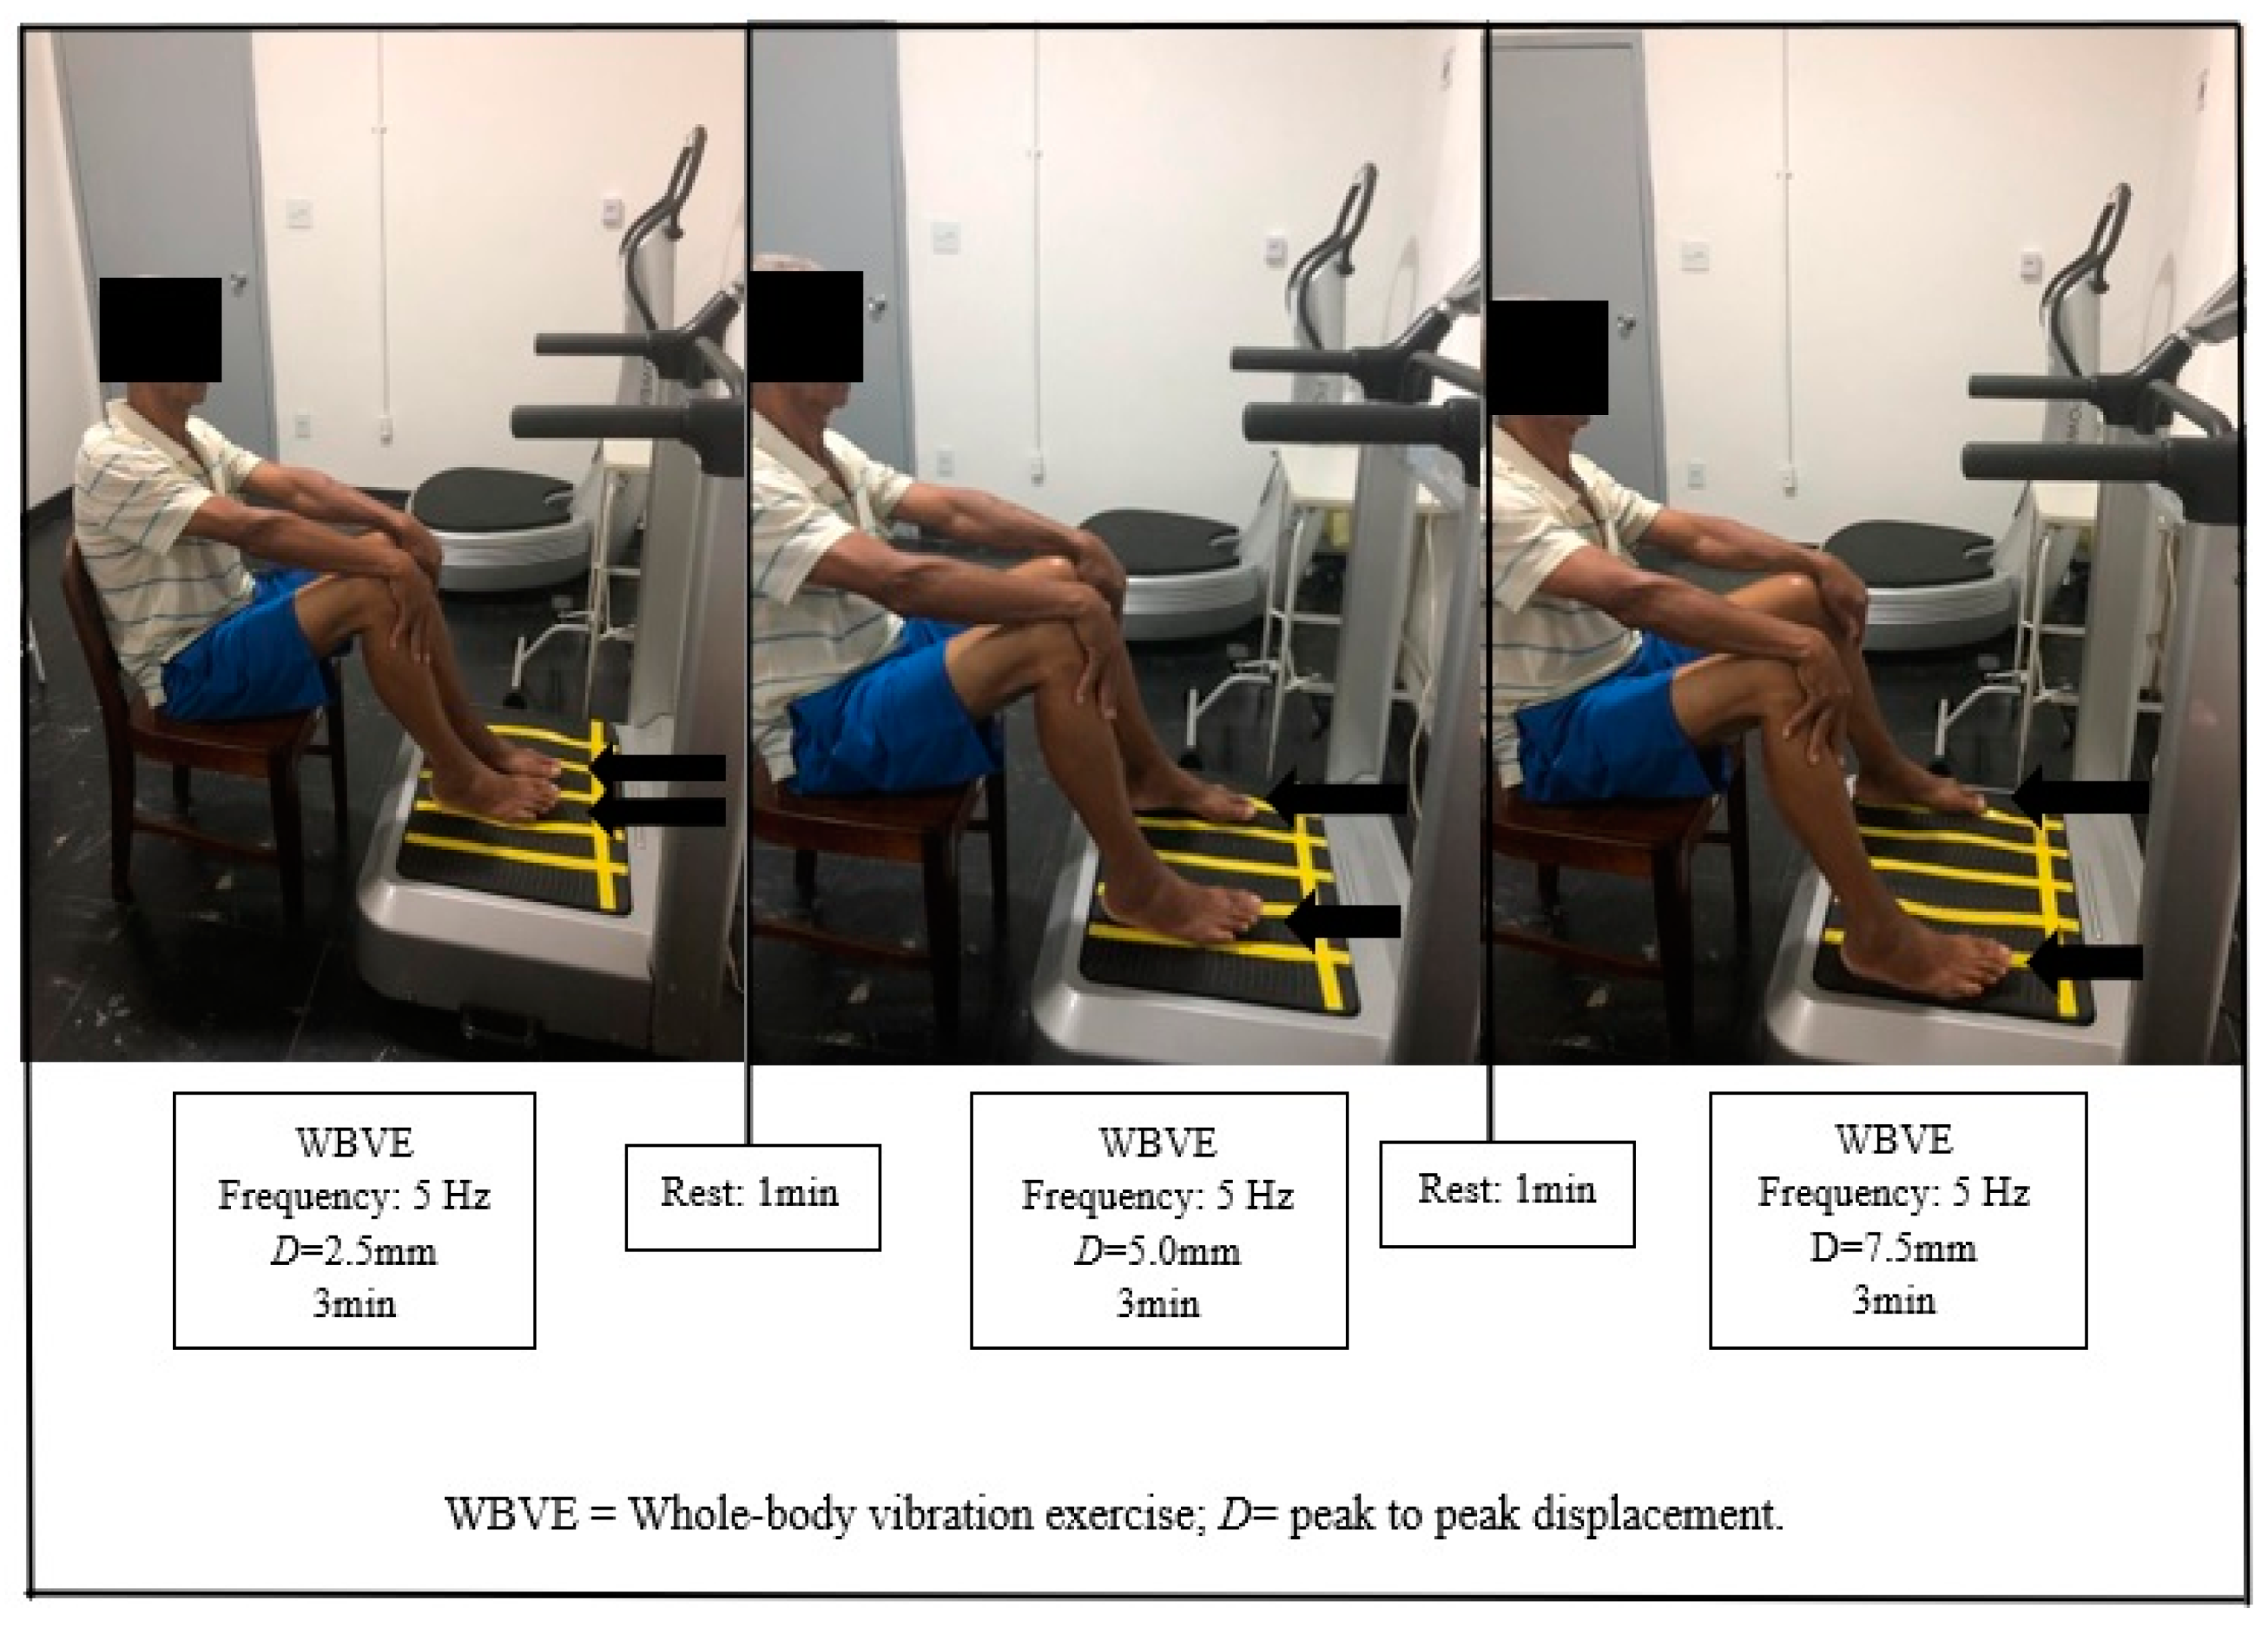 Applied Sciences | Free Full-Text | Acute Effects of Whole-Body Vibration  Exercise on Pain Level, Functionality, and Rating of Exertion of Elderly  Obese Knee Osteoarthritis Individuals: A Randomized Study